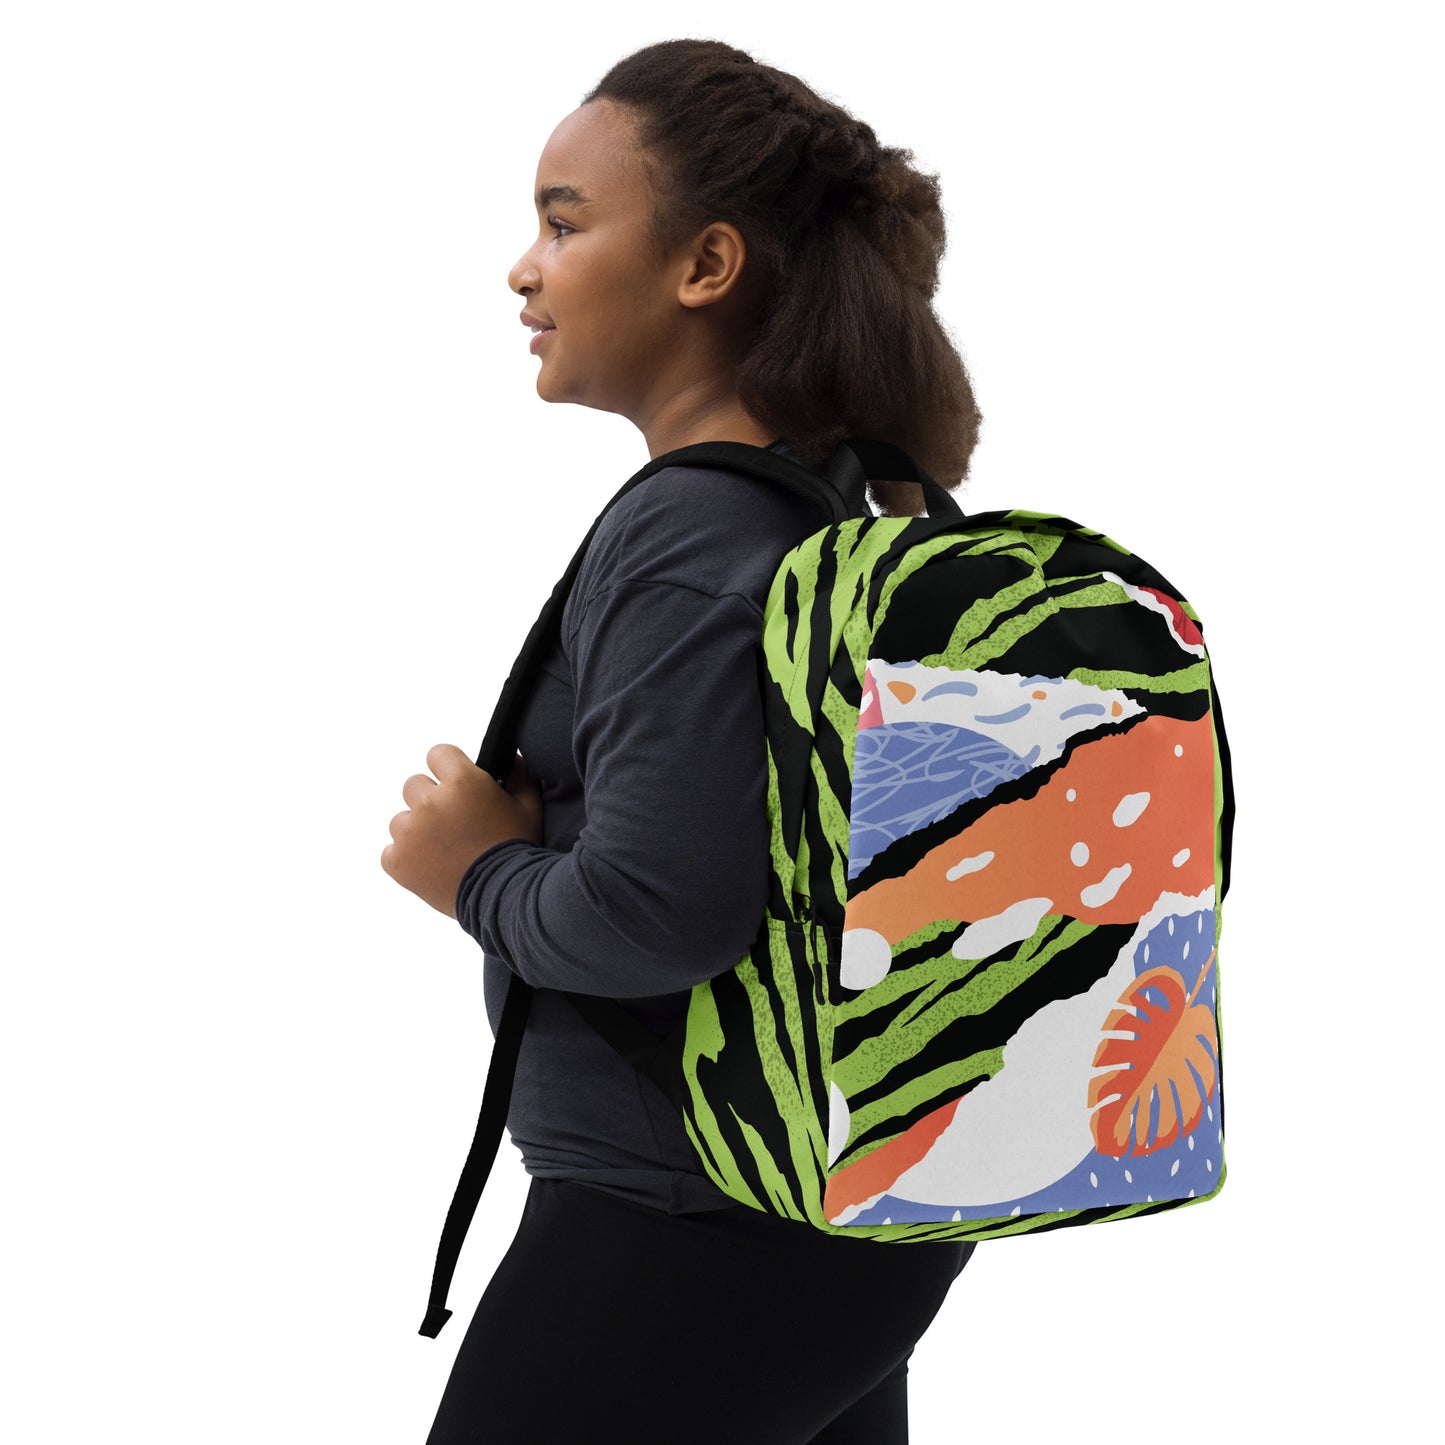 Tropical pop art minimalist backpack carried by a woman